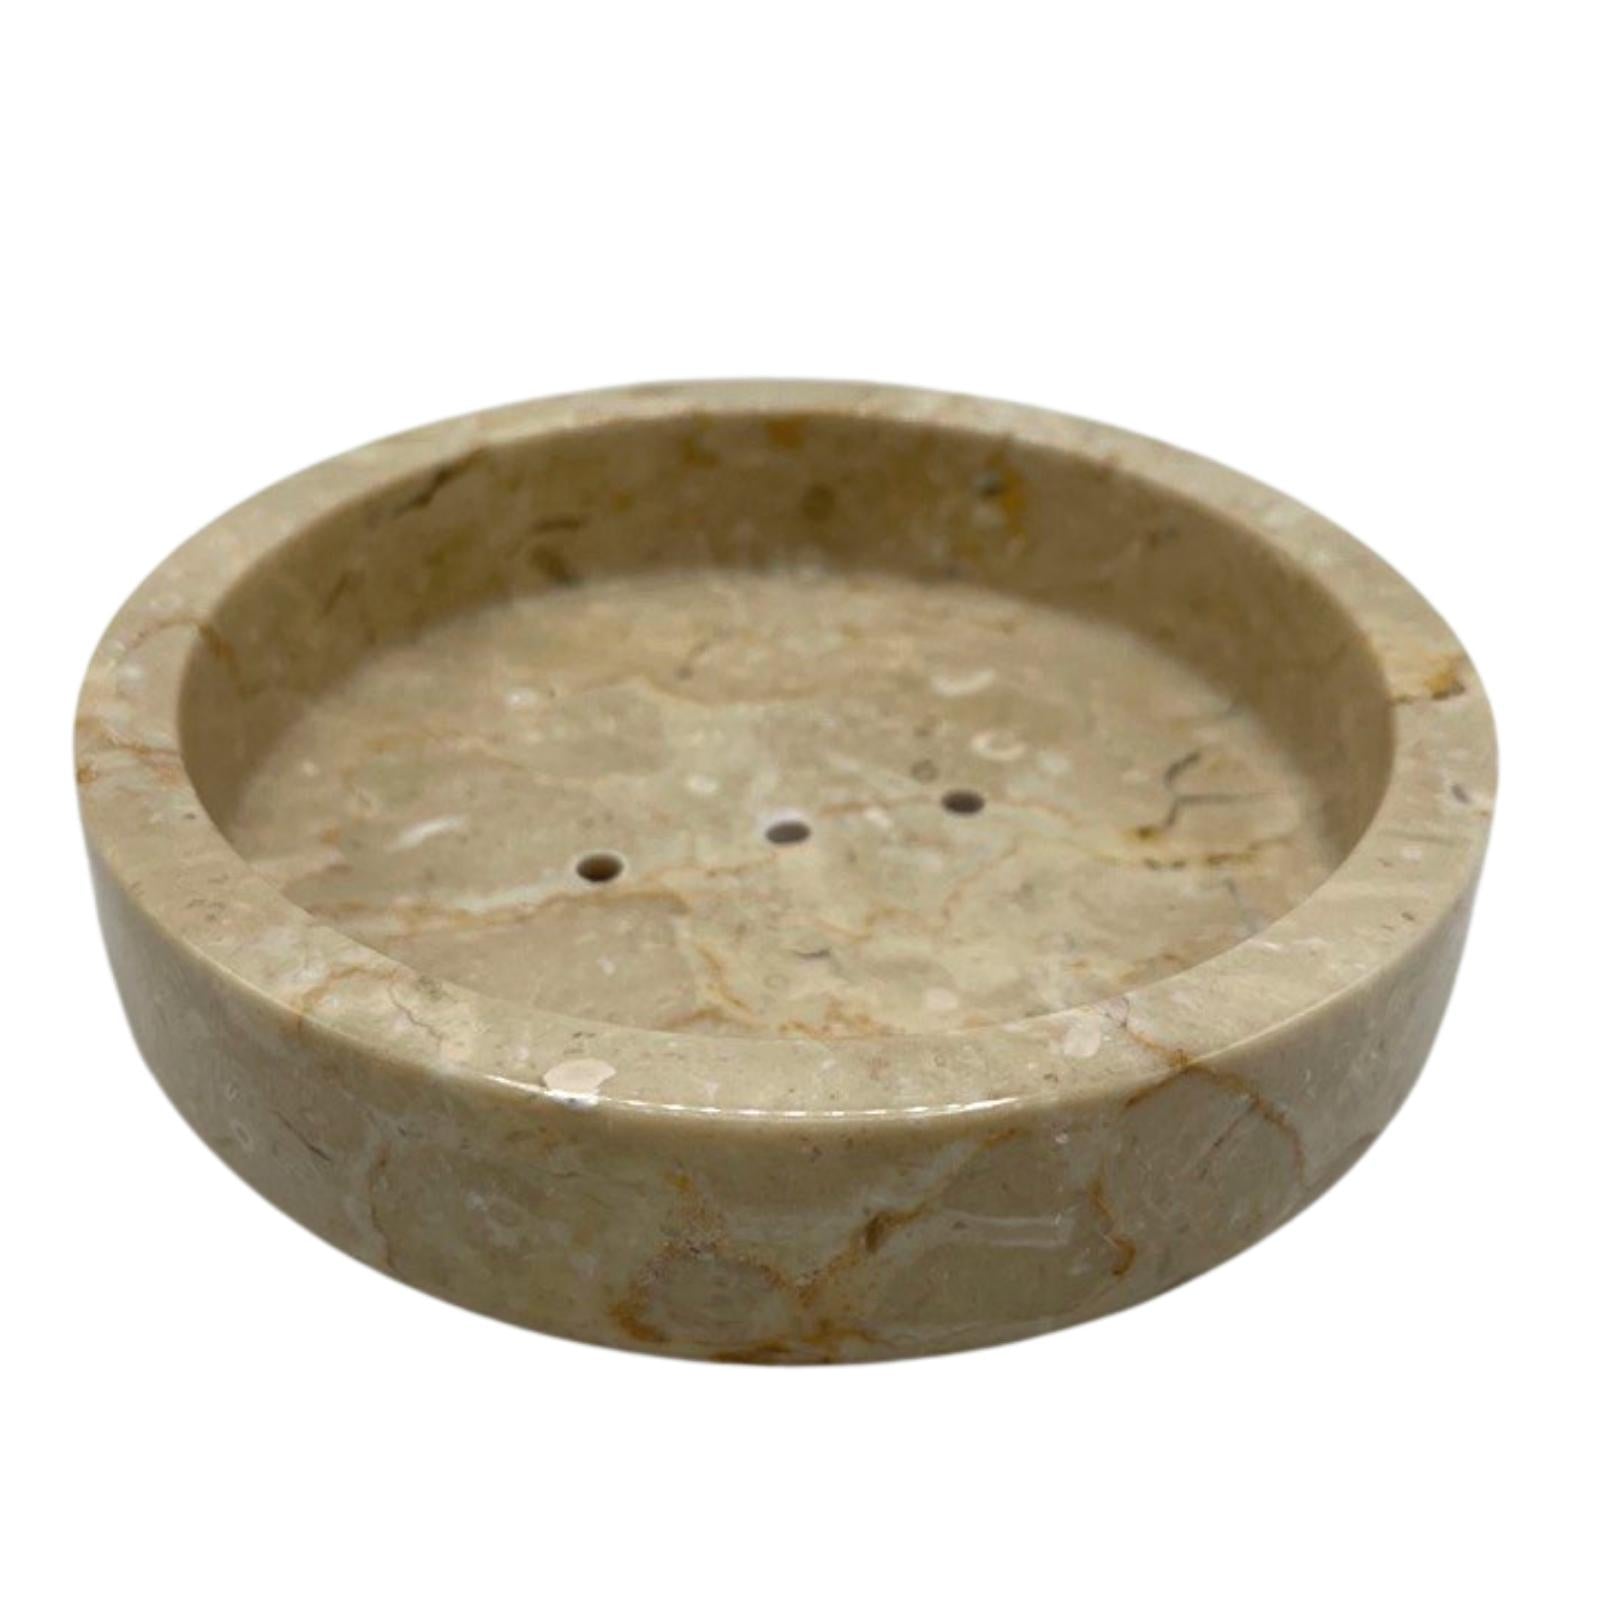 View Round Honey Marble Flat Soap Dish information